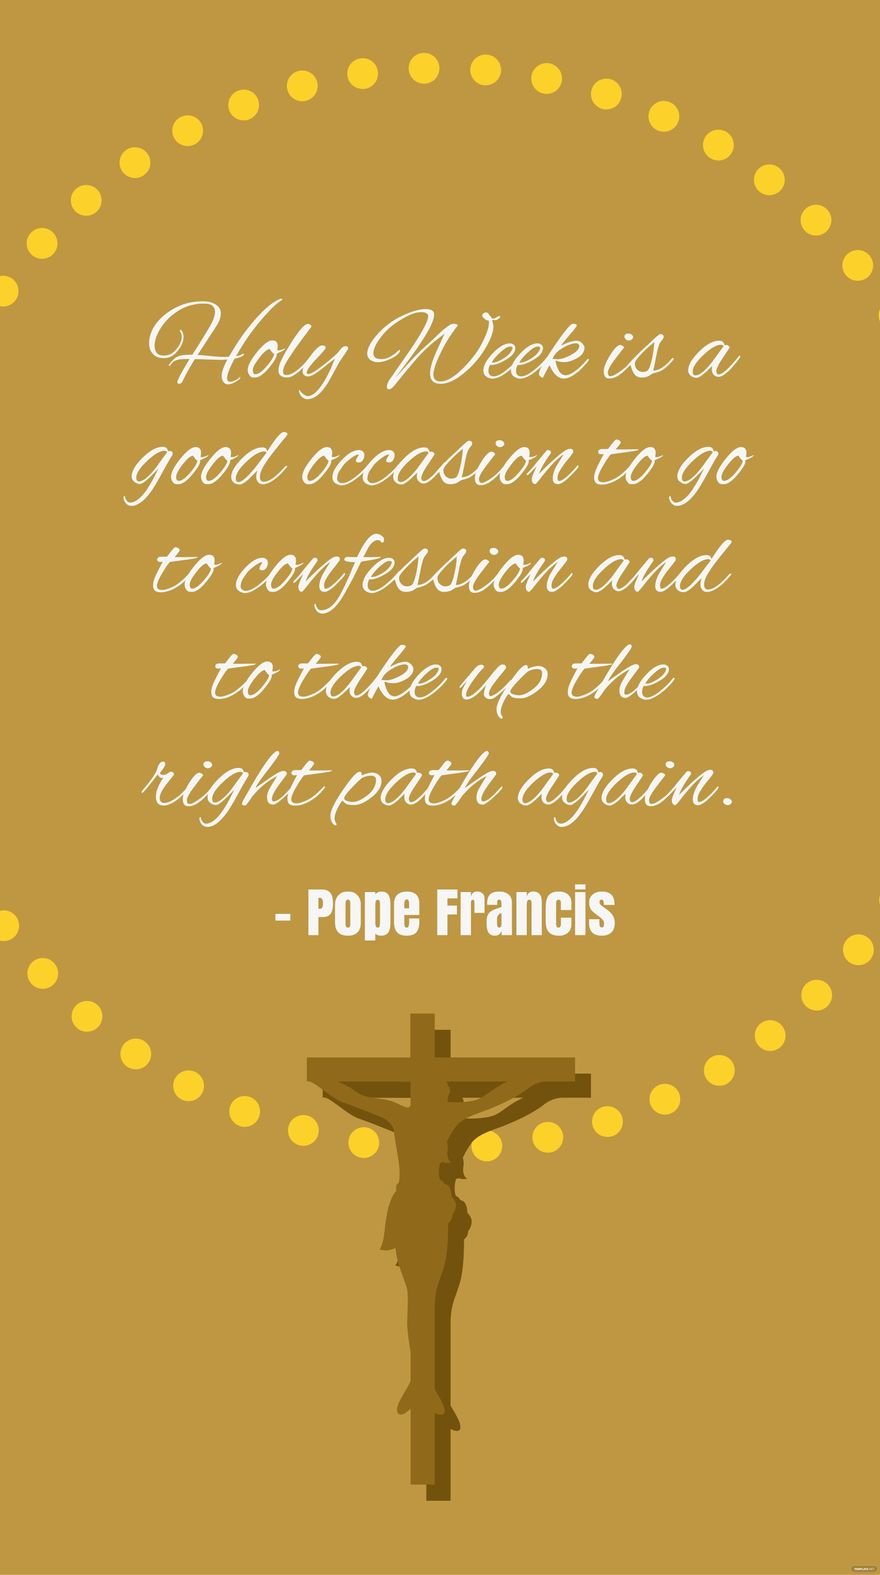 Free Pope Francis - Holy Week is a good occasion to go to confession and to take up the right path again.